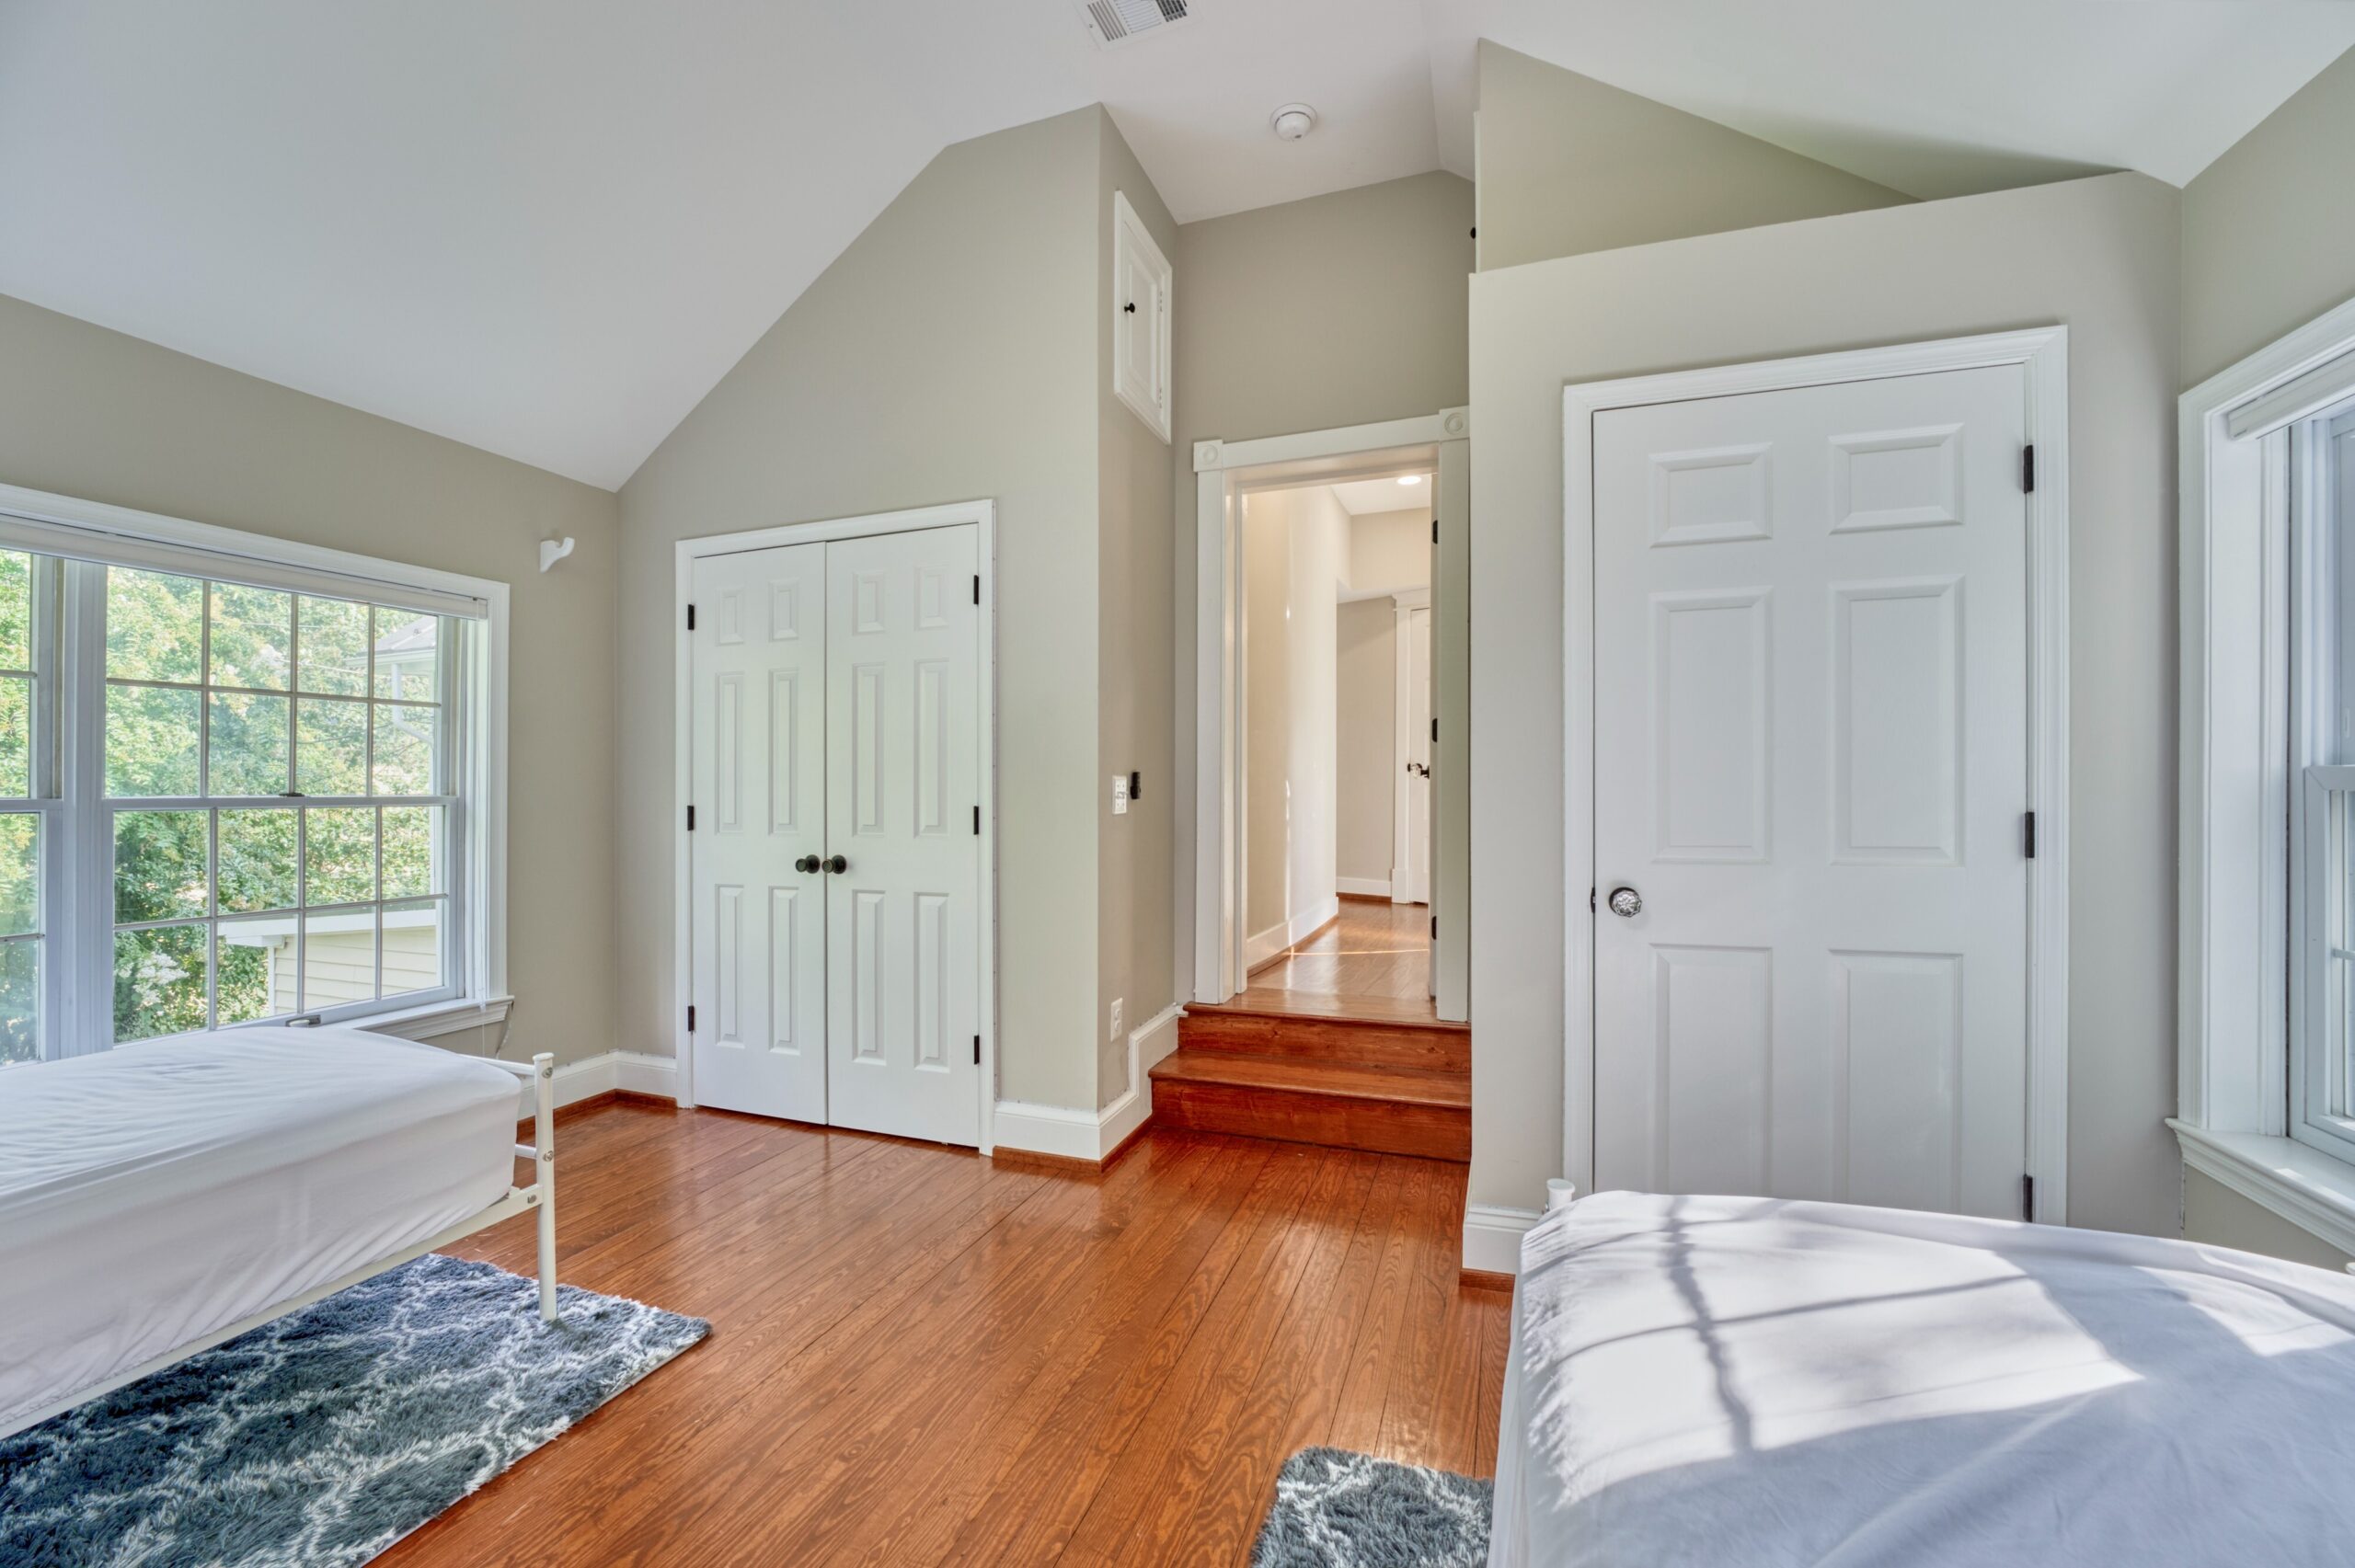 additional perspective of large bedroom with vaulted ceiling in historic home with gleaming hardwood floors.